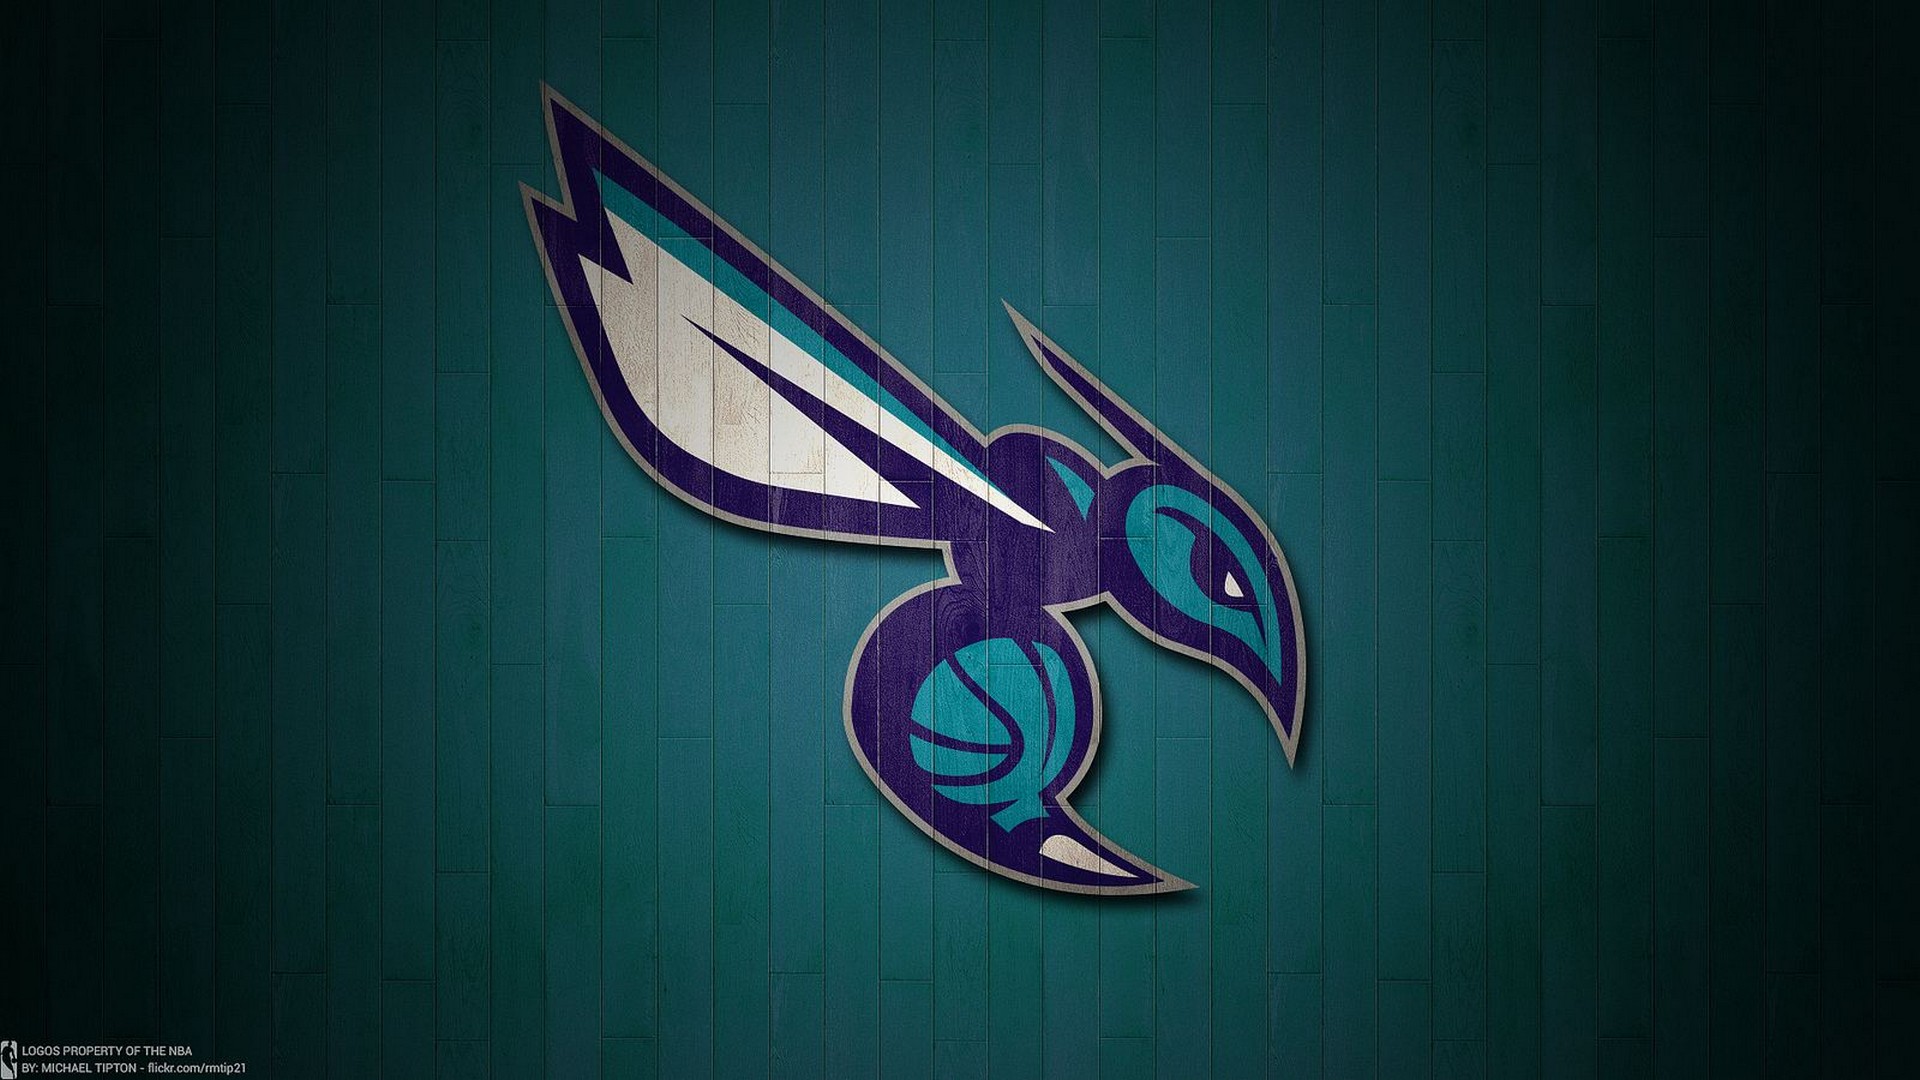 Charlotte Hornets Wallpaper With high-resolution 1920X1080 pixel. You can use this wallpaper for your Desktop Computer Backgrounds, Windows or Mac Screensavers, iPhone Lock screen, Tablet or Android and another Mobile Phone device